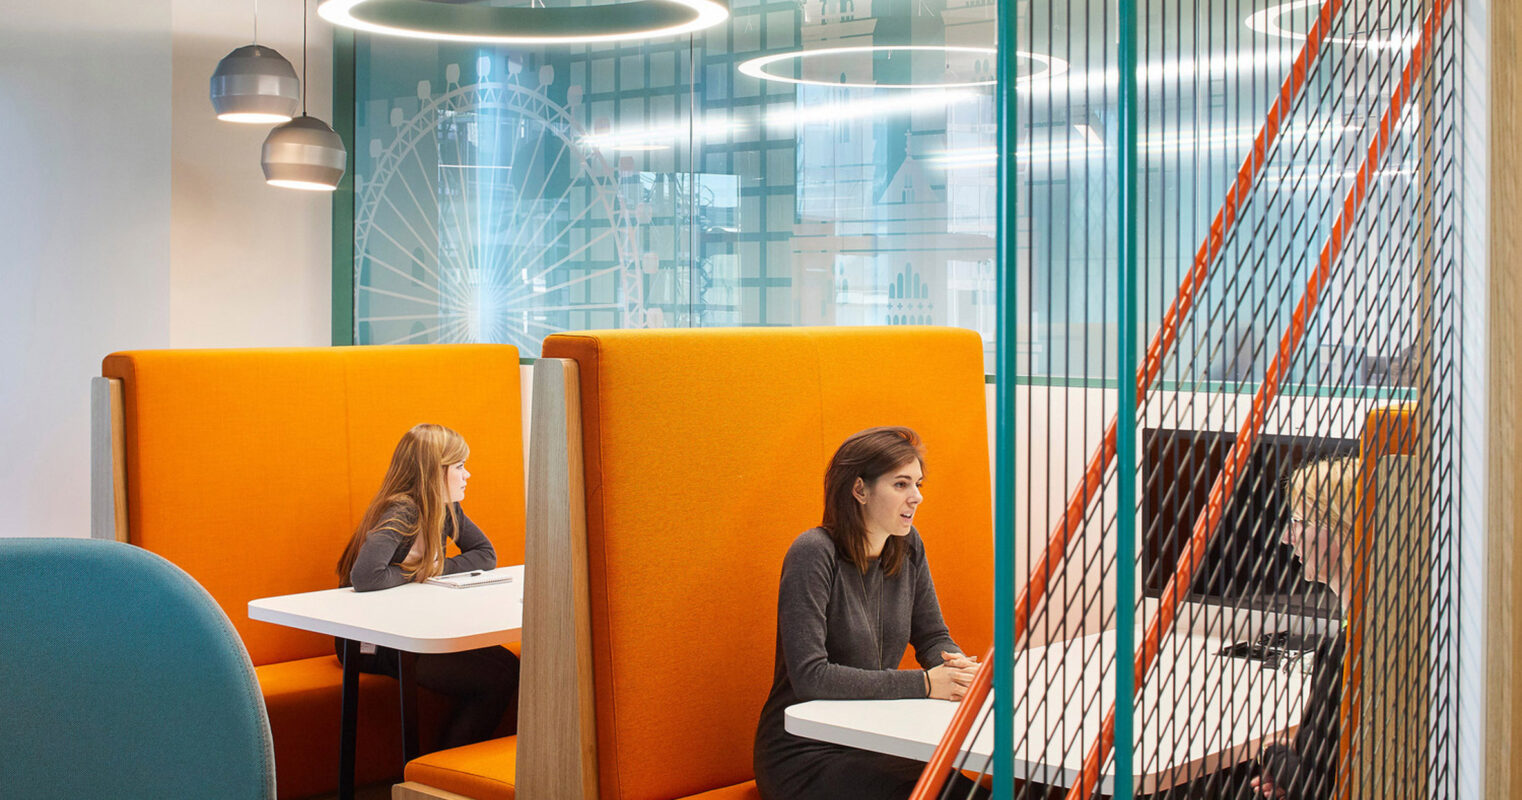 Modern office breakout space with vibrant orange privacy booths, complemented by teal chairs. Overhead, industrial-style pendant lights illuminate the area. Behind a partition featuring vertical colored cords, a collaborative workspace with a staircase is subtly visible.